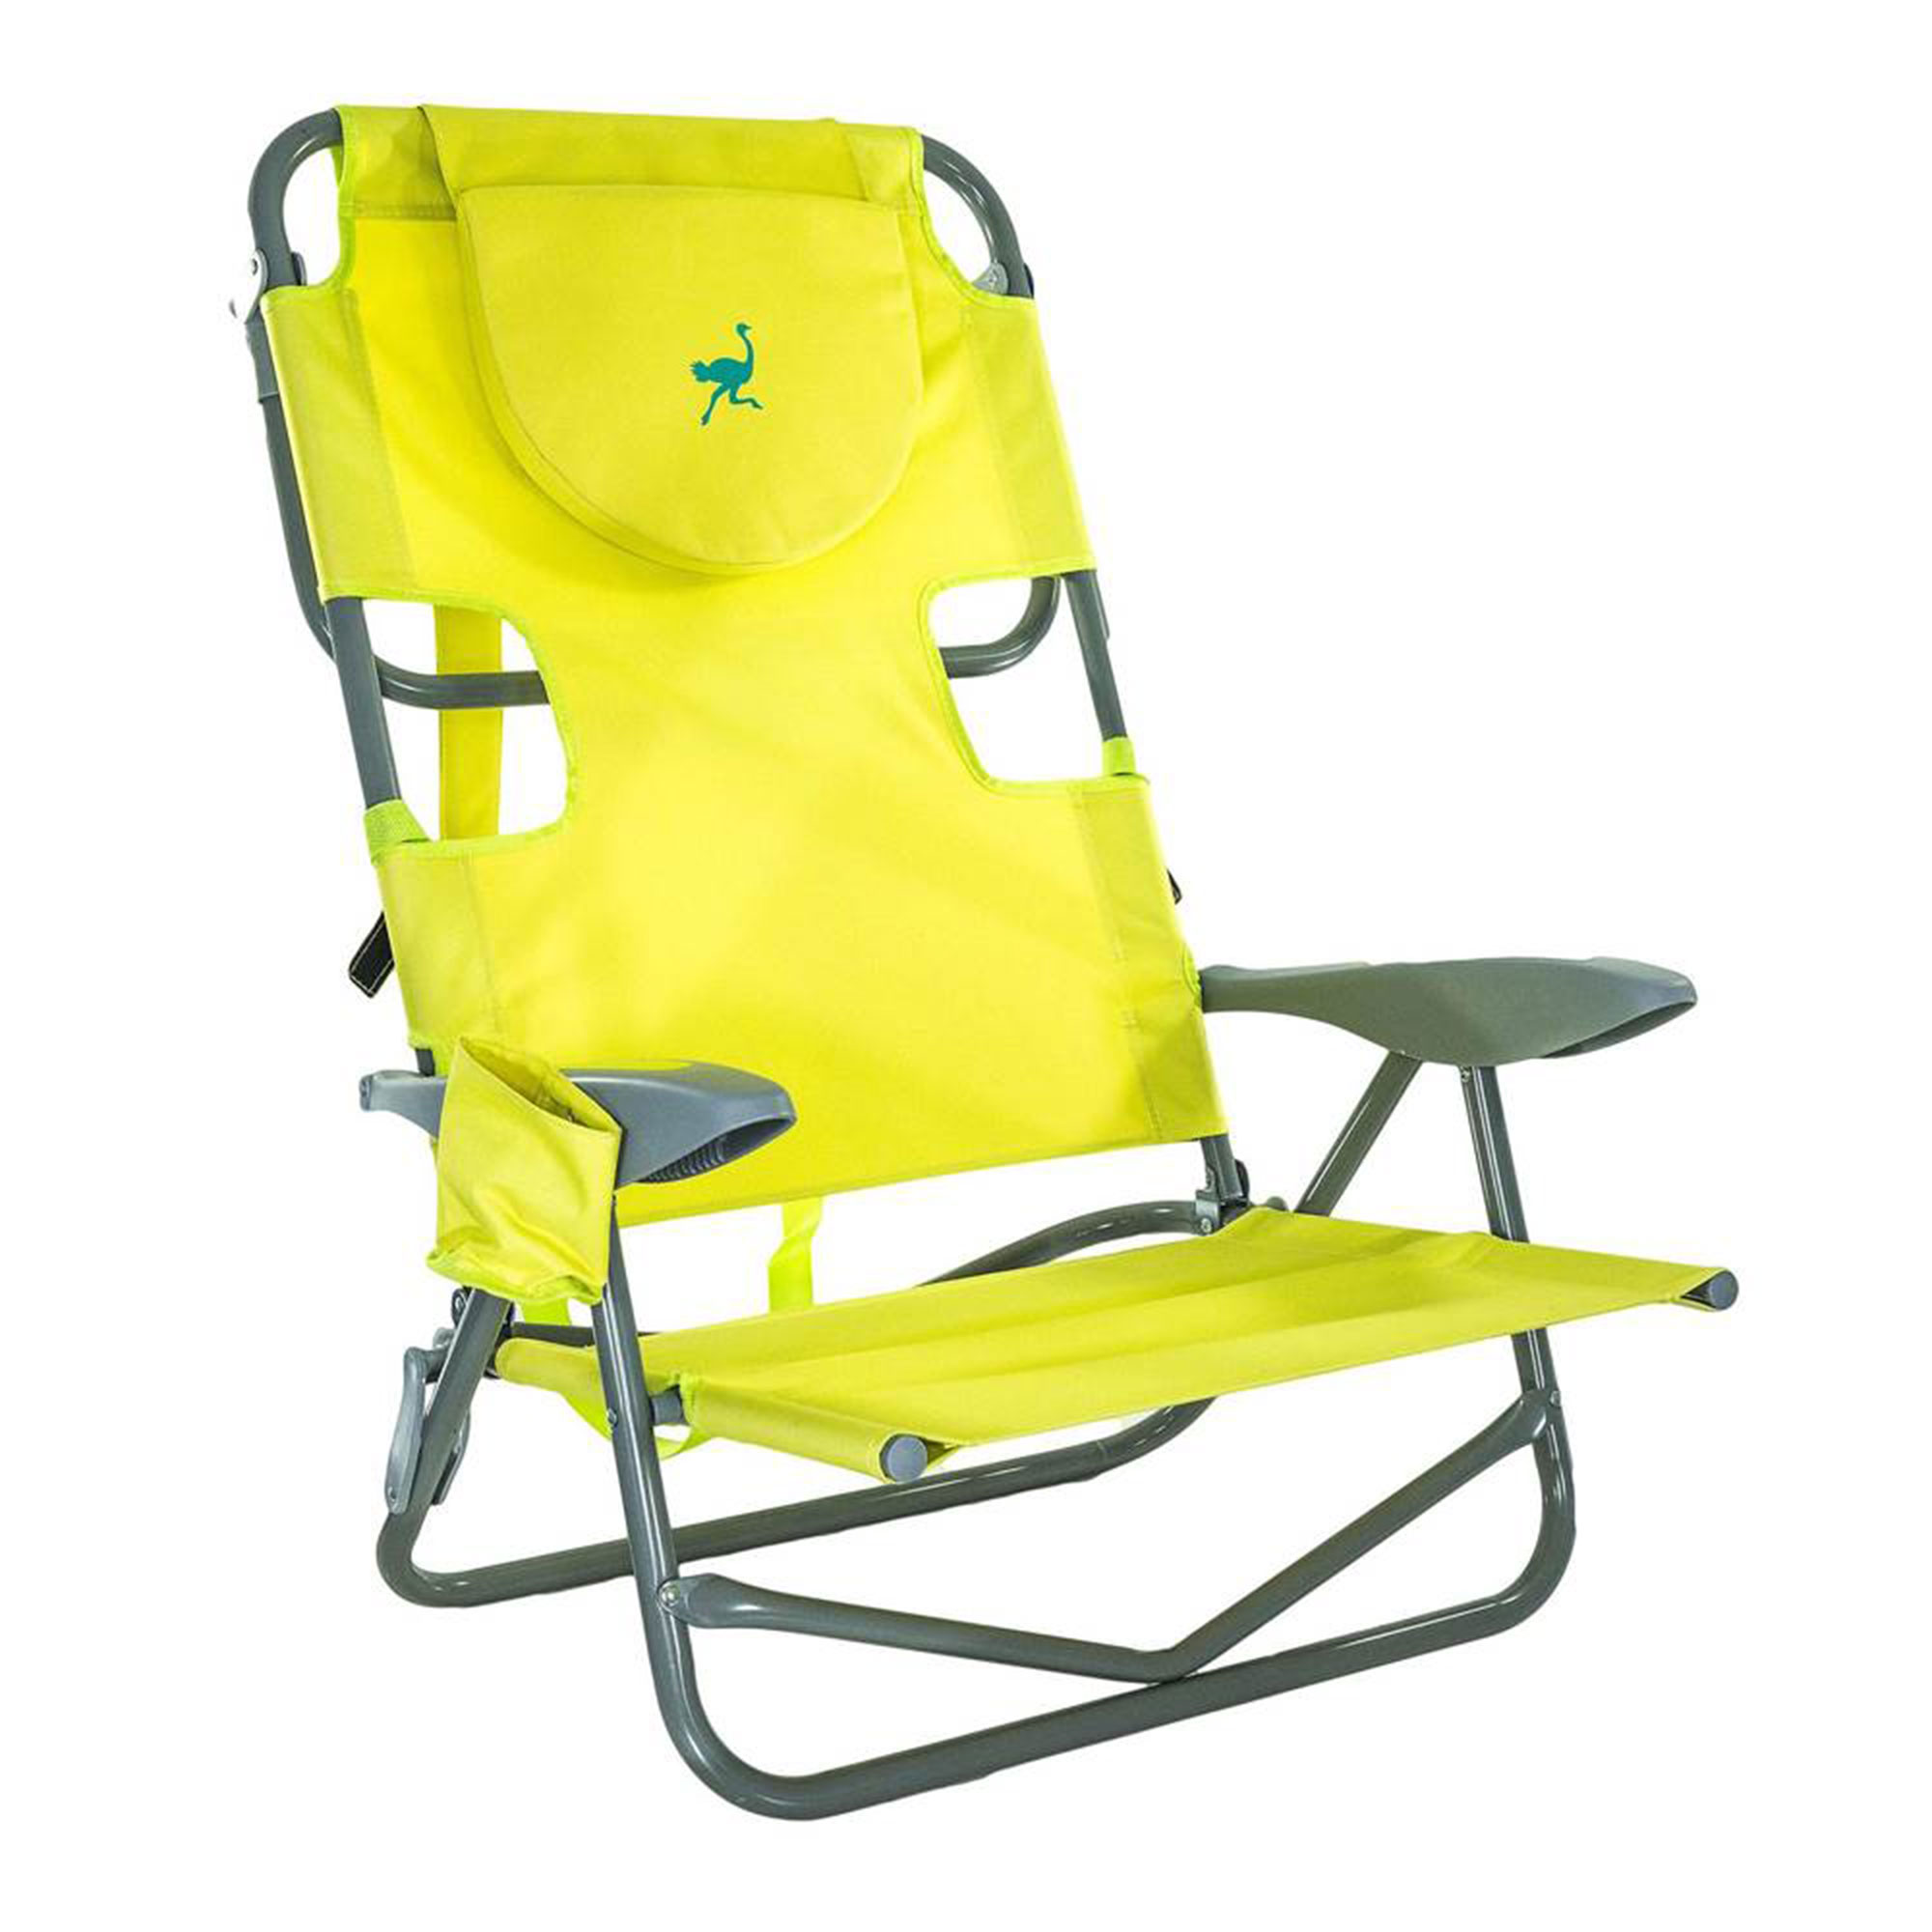 Ostrich On-Your-Back Outdoor Reclining Beach Pool Camping Chair, Green - image 5 of 9